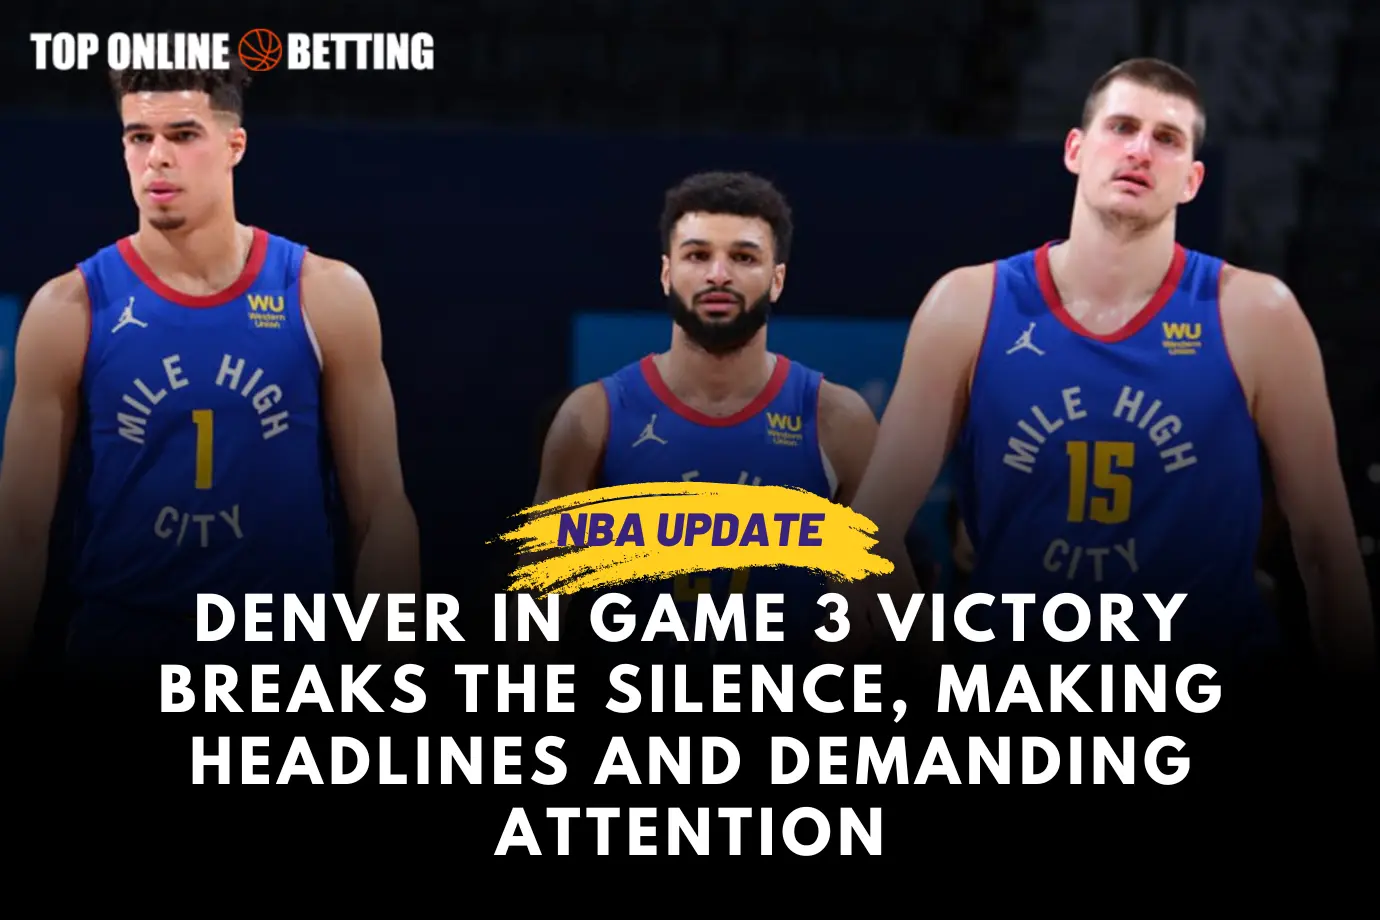 Denver in Game 3 Victory Breaks the Silence, Making Headlines and Demanding Attention